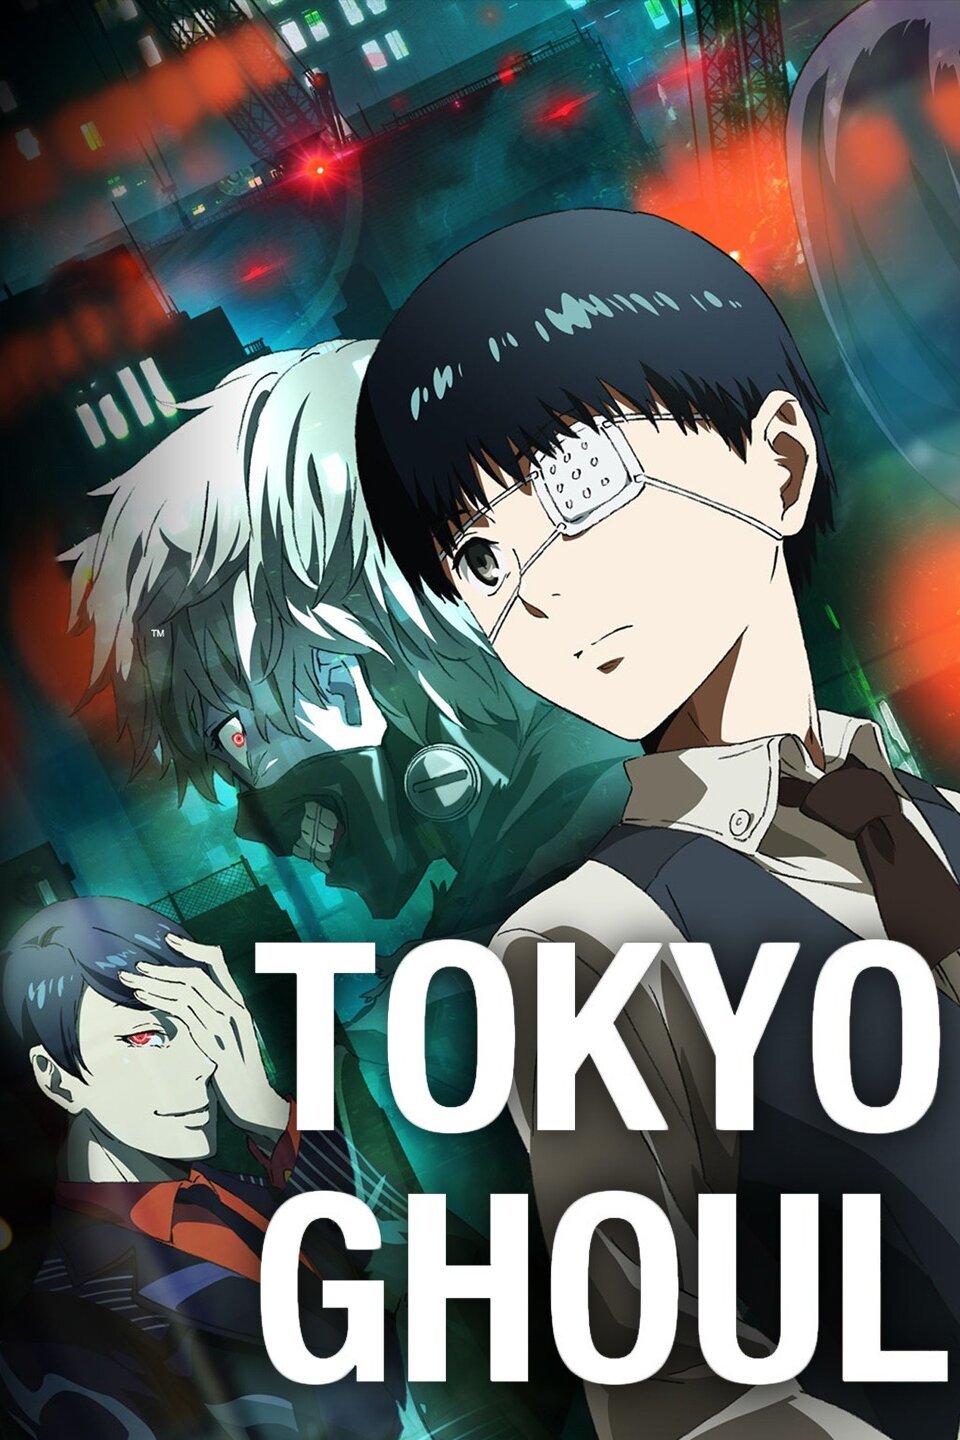 tokyo ghoul opening song name